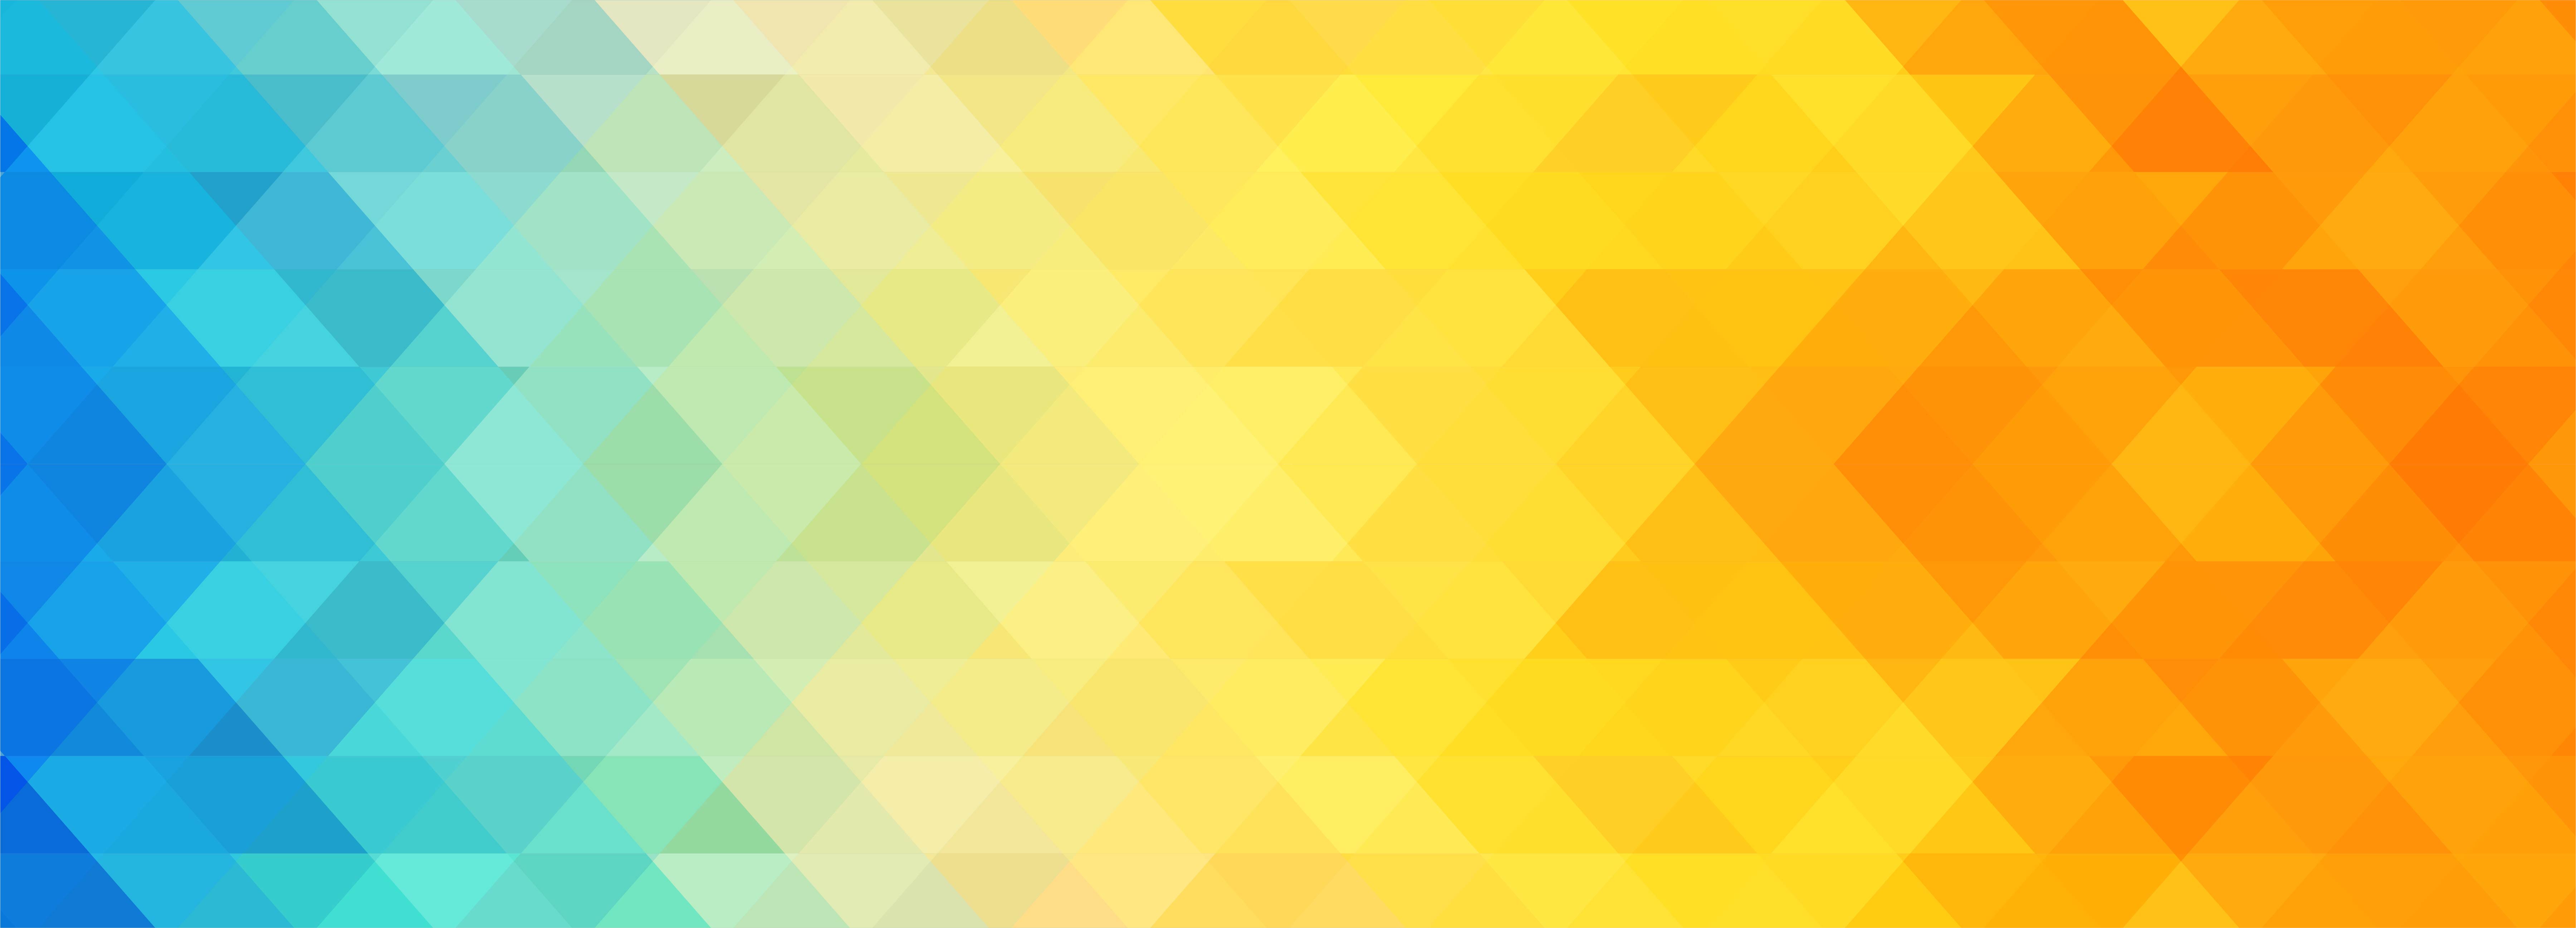 Abstract Colorful Geometric Banner Template Background 694606 Vector